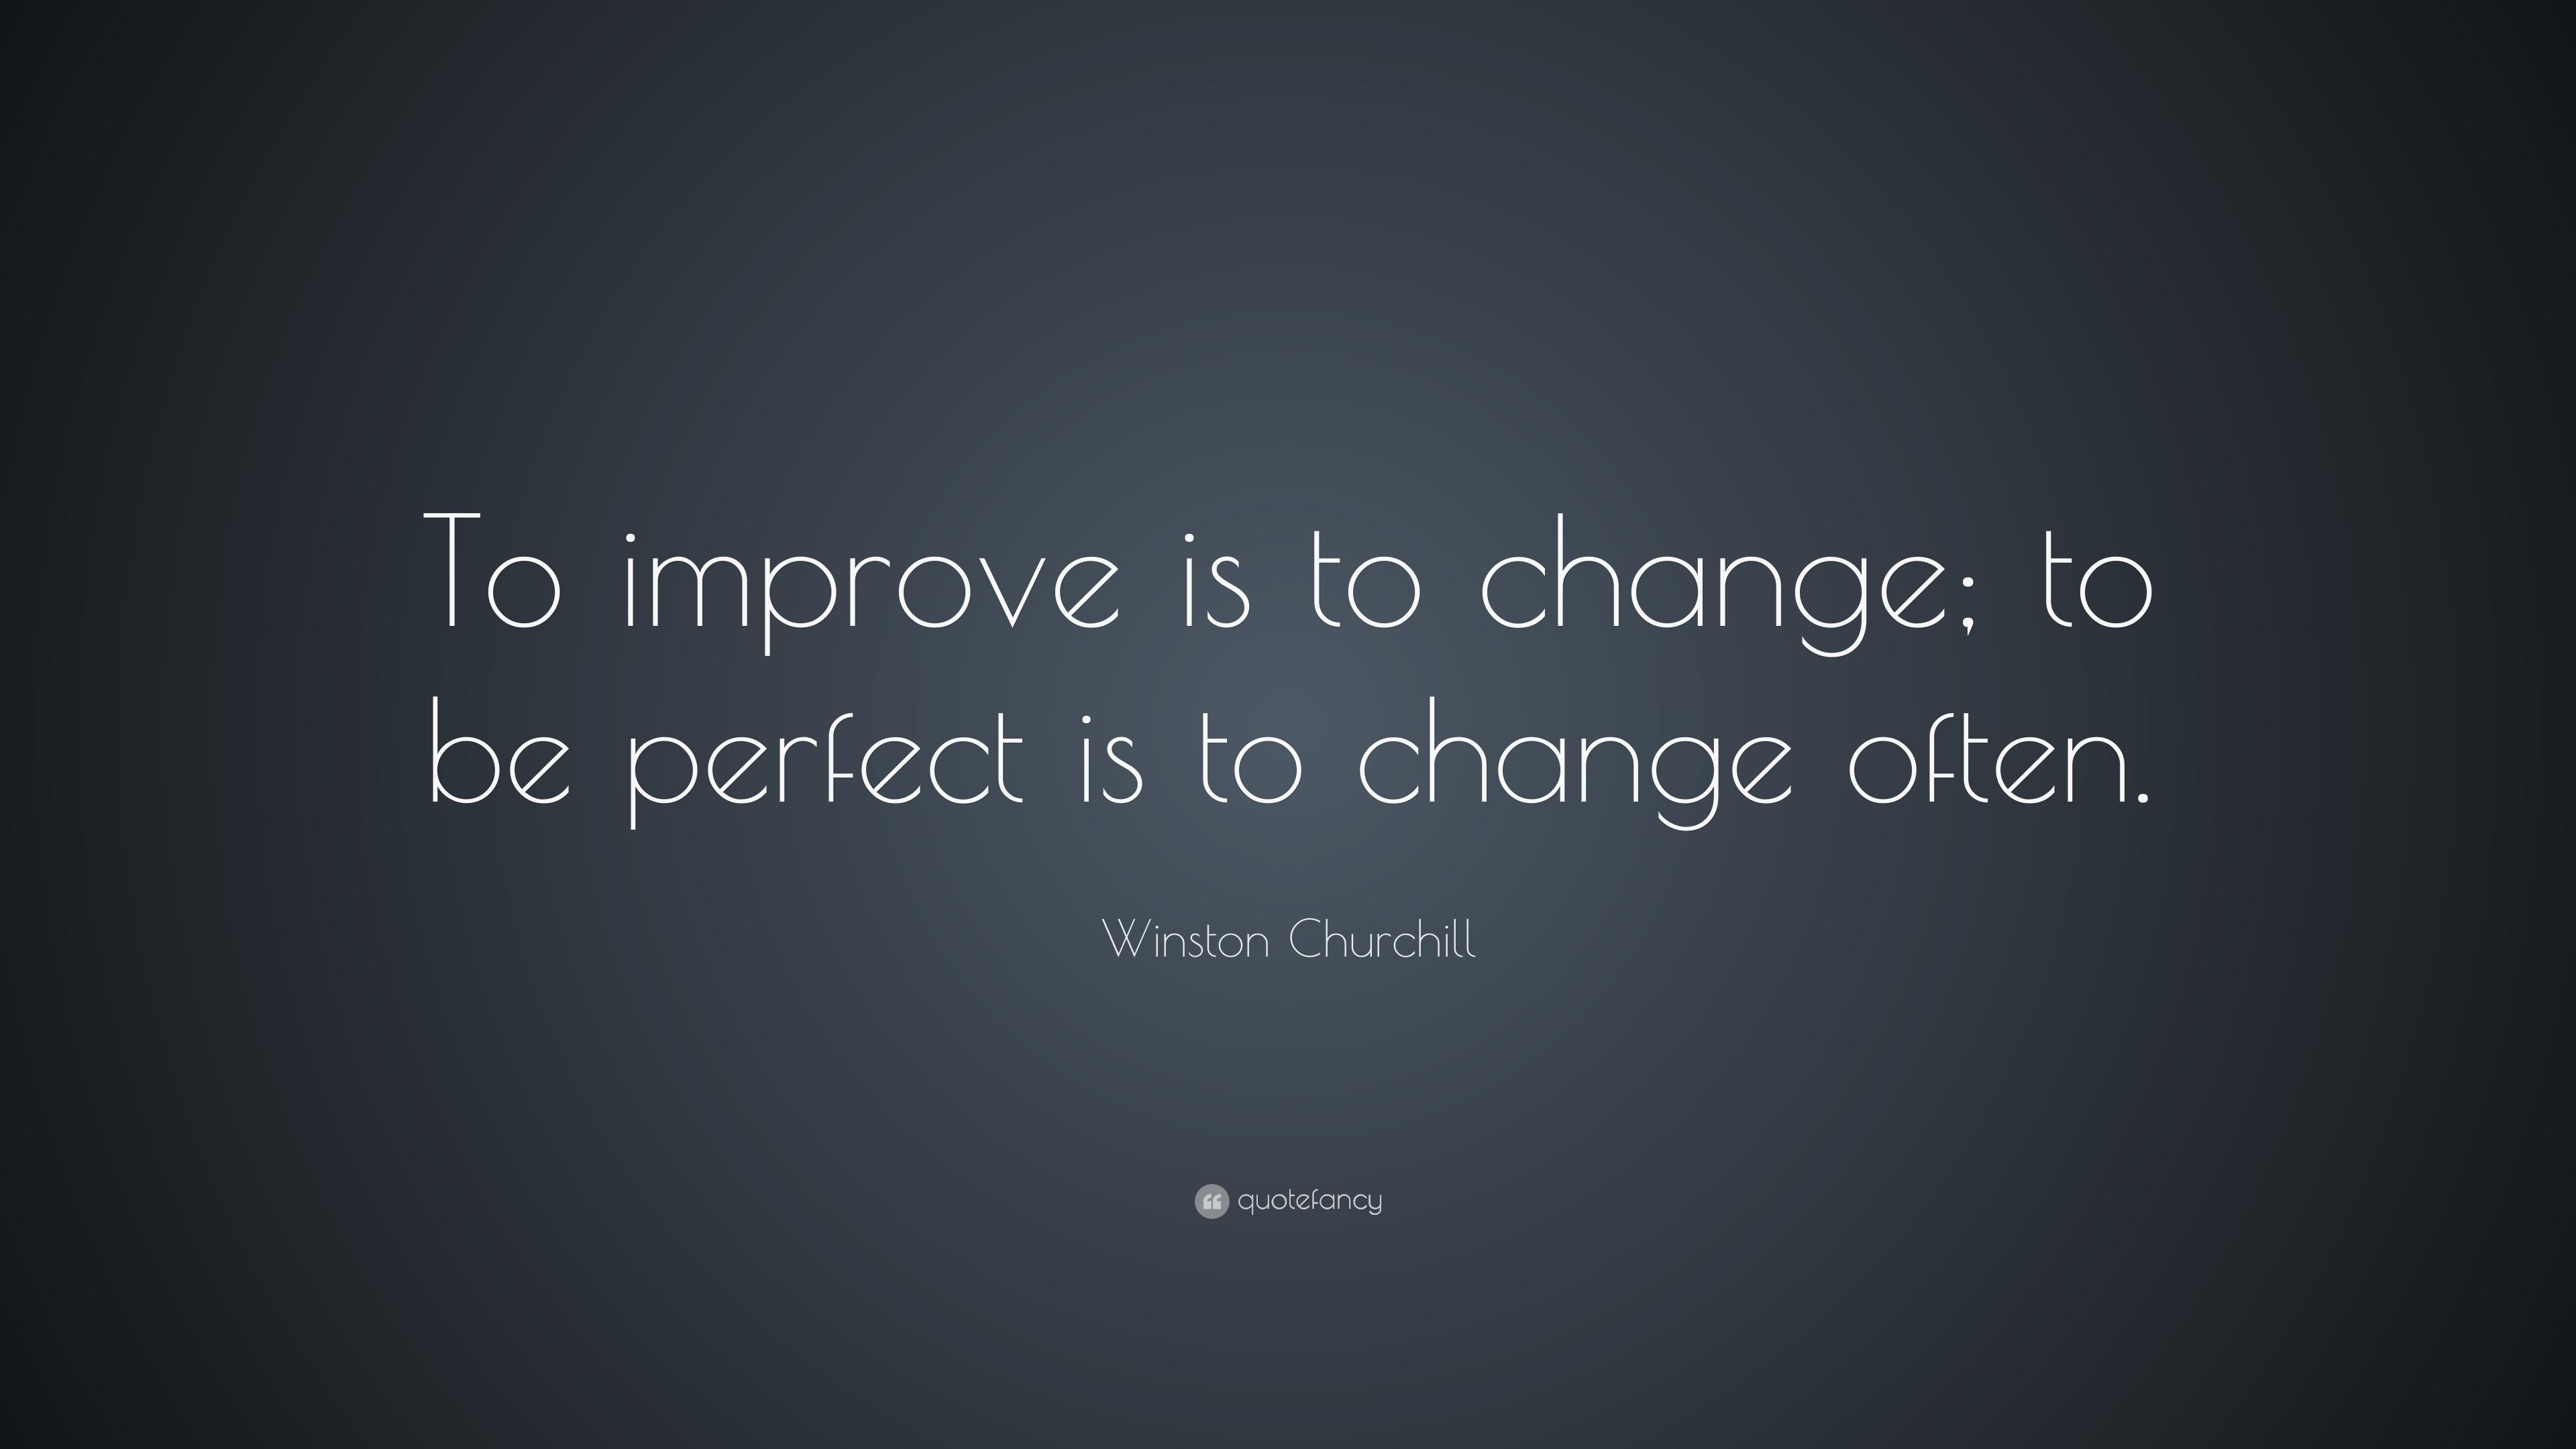 Winston Churchill Quote: “To improve is to change; to be perfect is